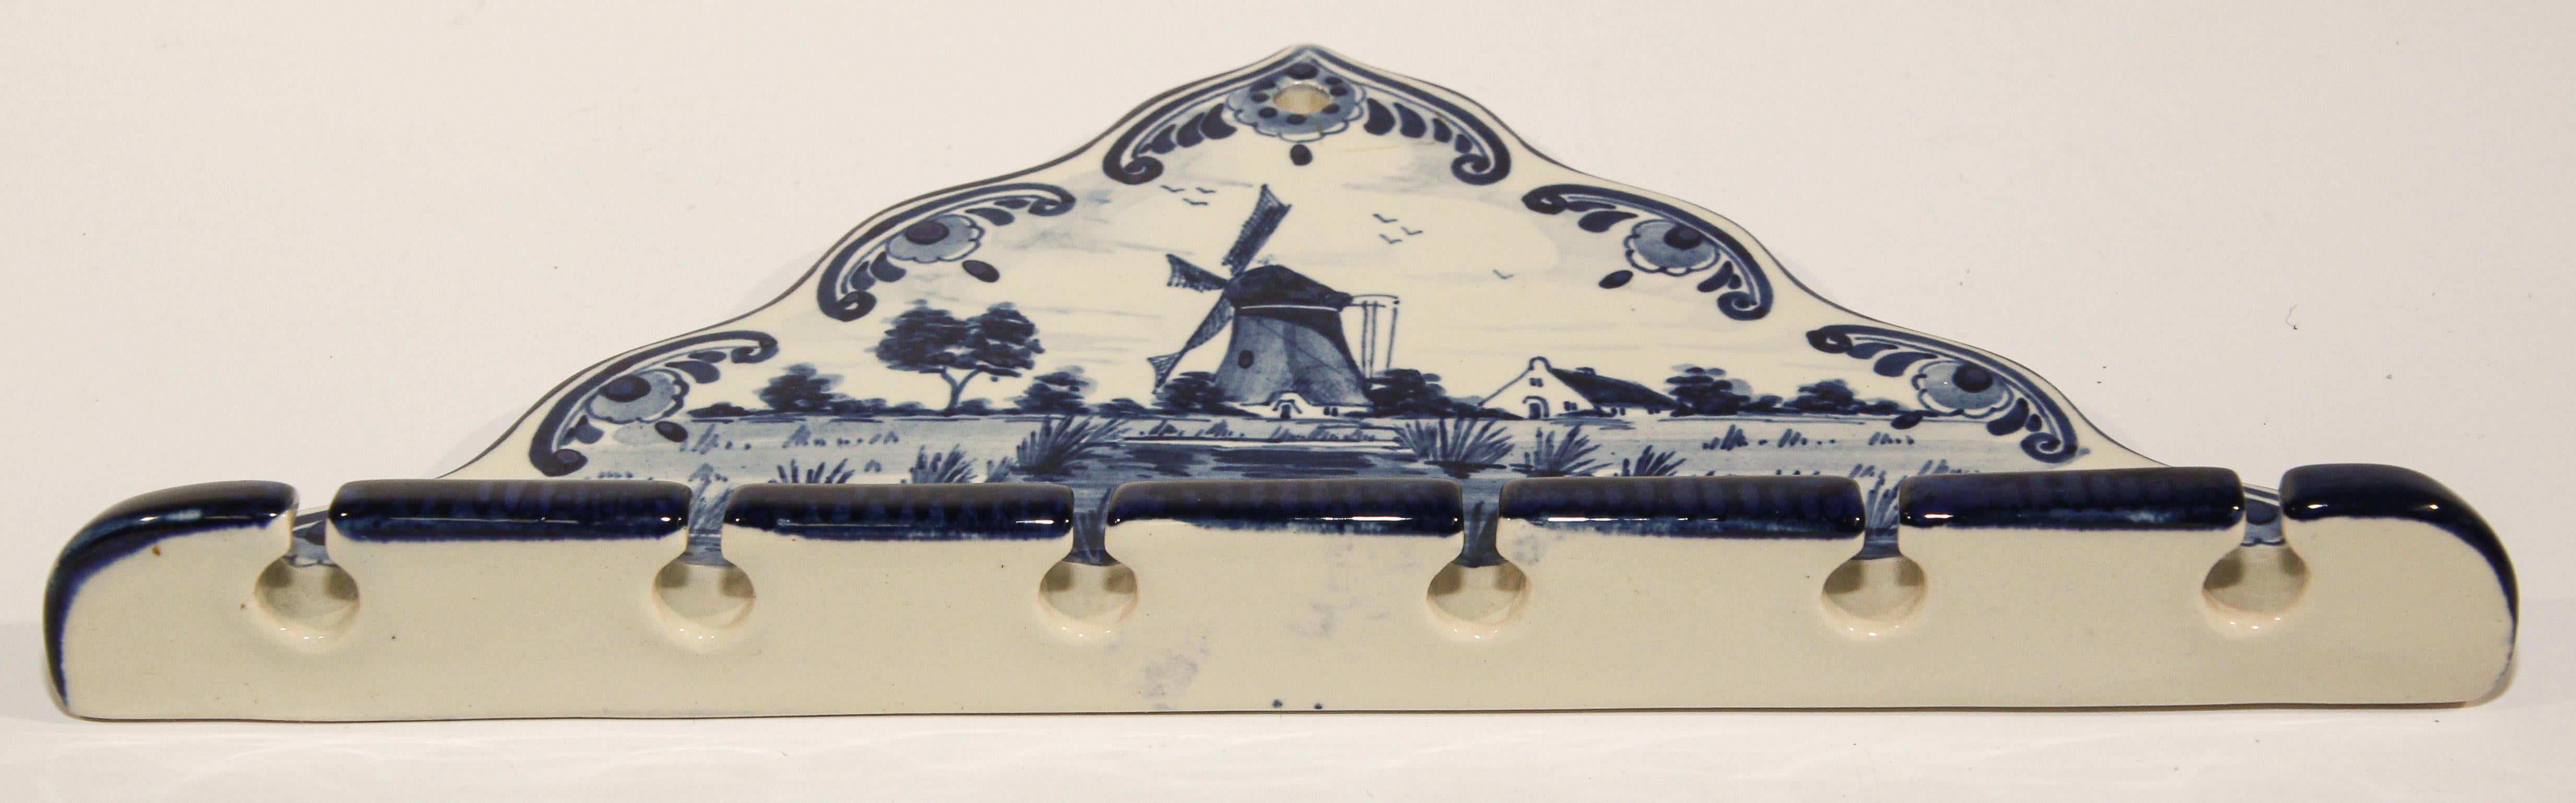 Vintage Blue and White Delft Porcelain Spoon Rack In Good Condition For Sale In North Hollywood, CA